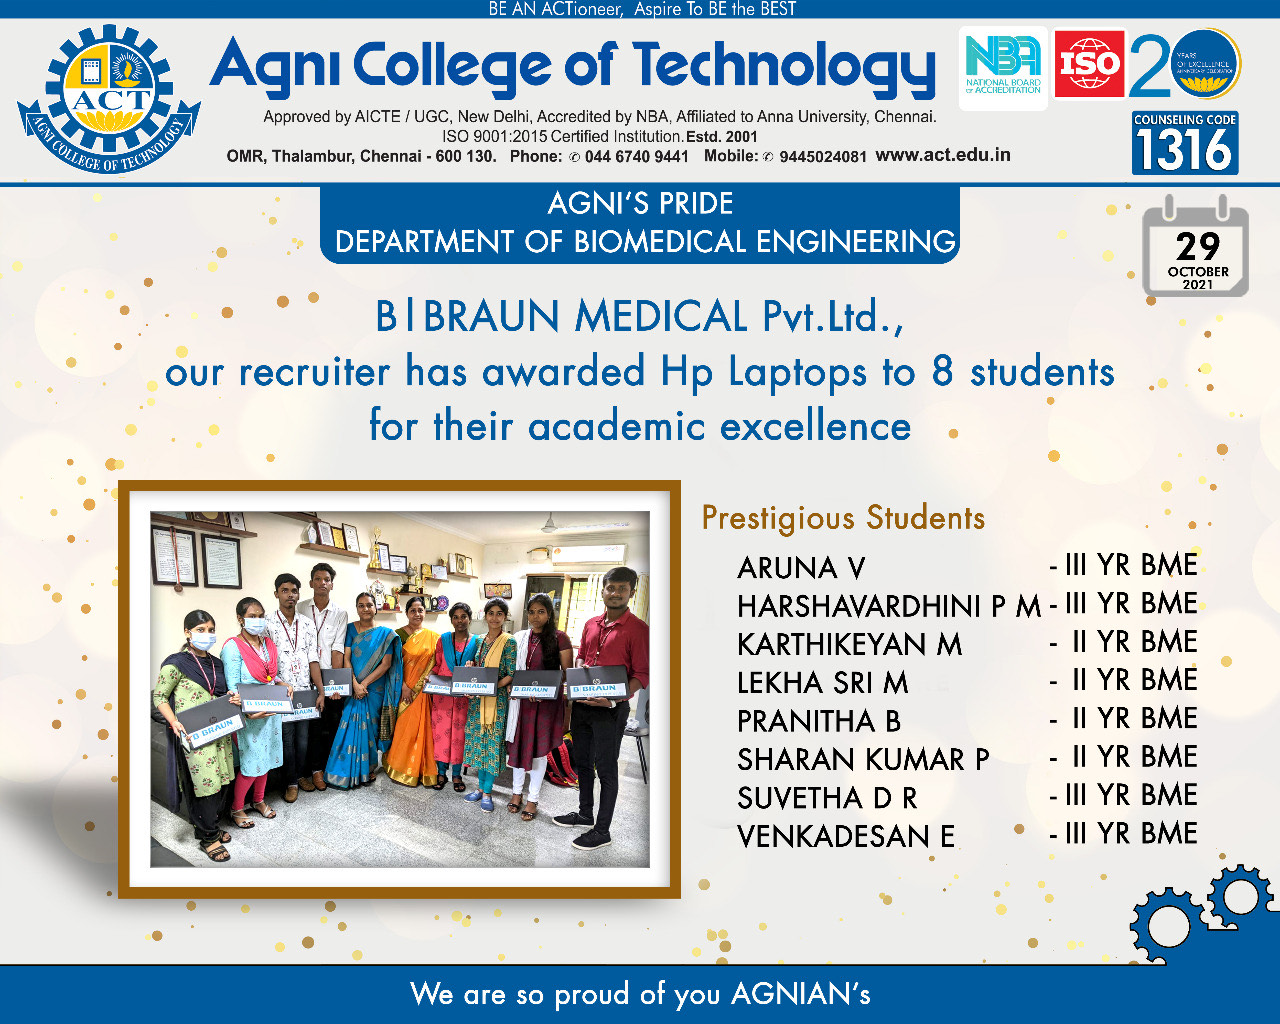 Agni’s pride from Bio Medical Engineering